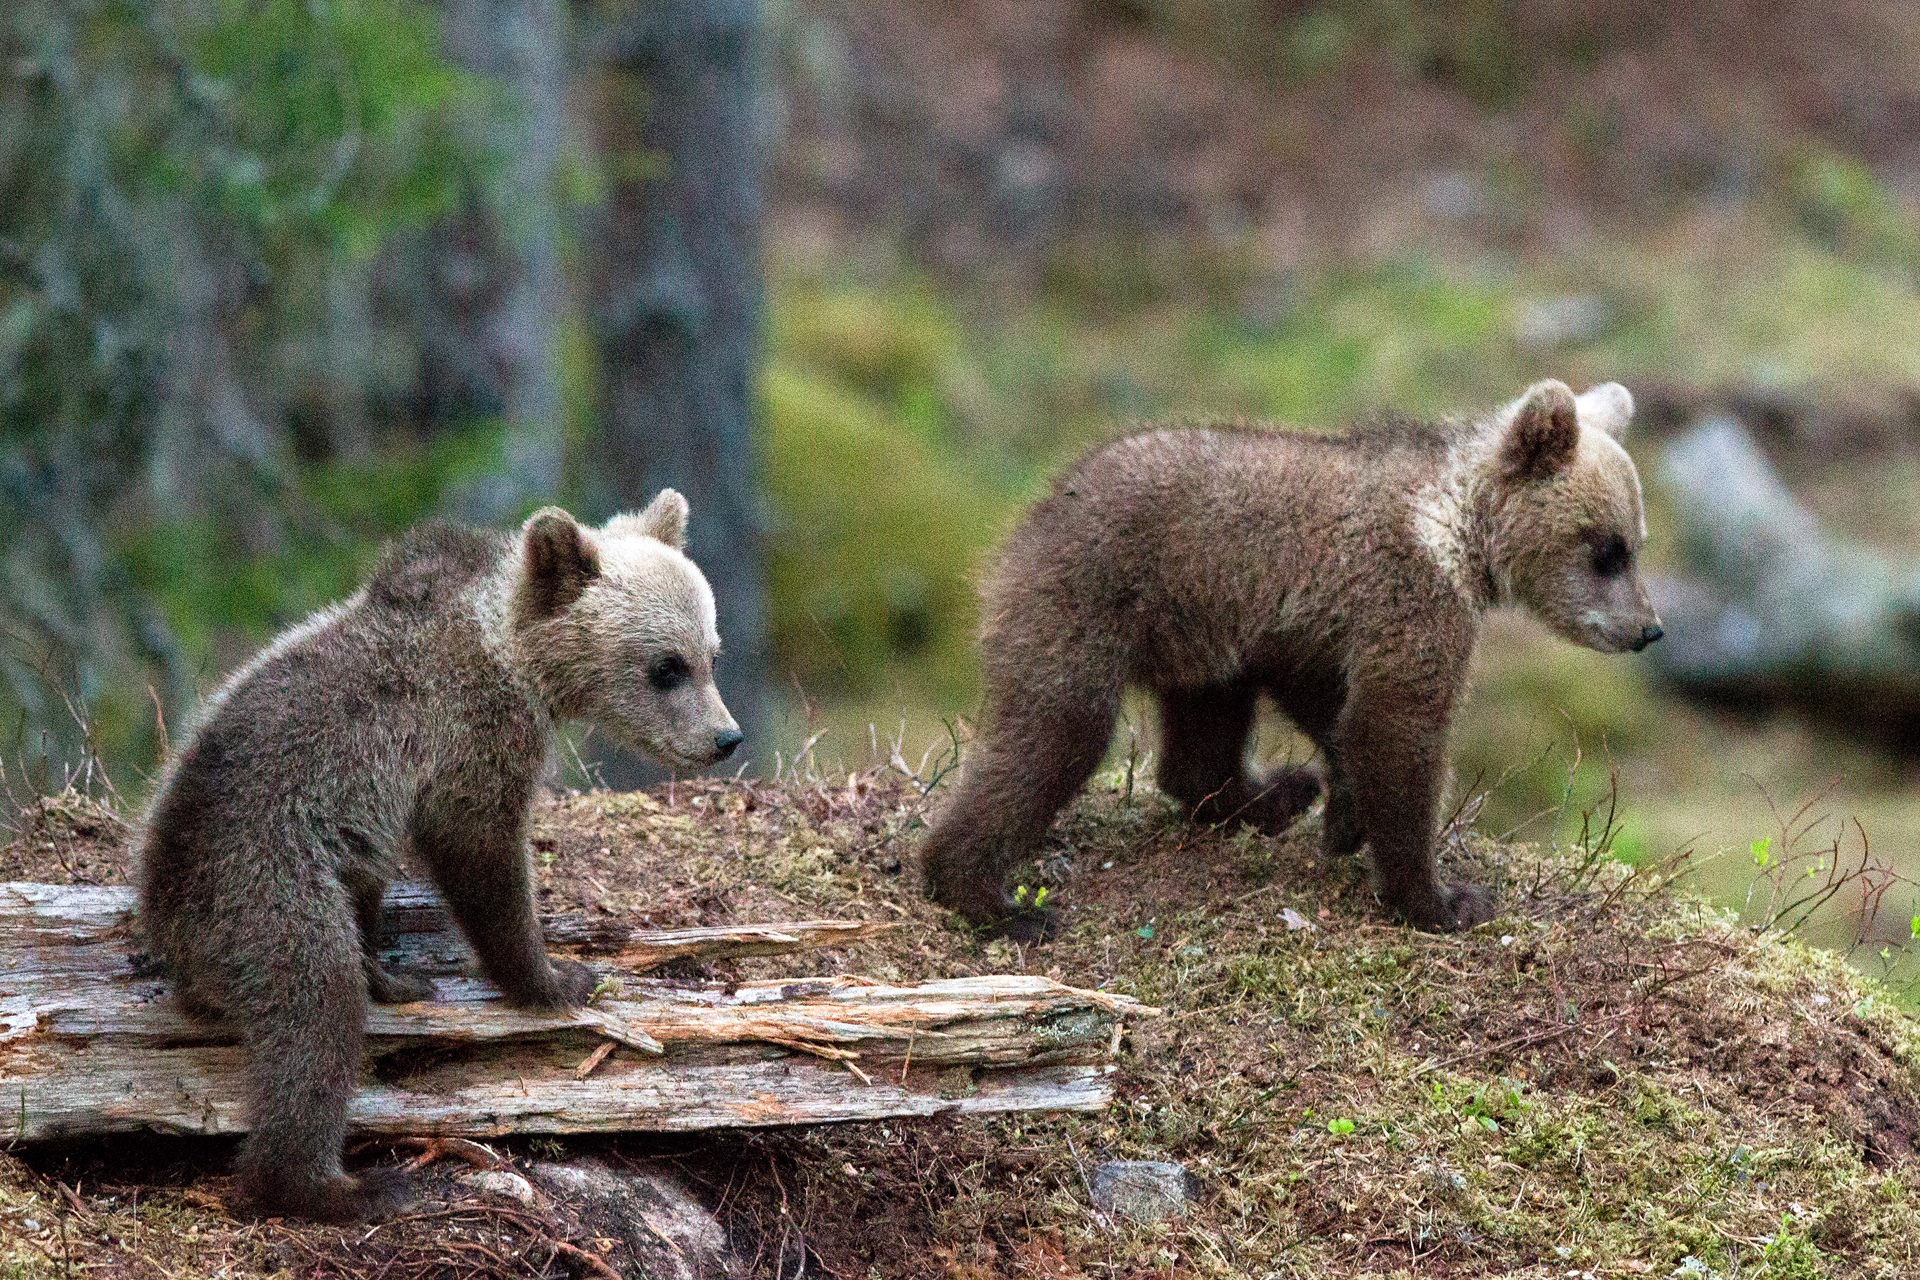 At the right time of year, you can see very young bears